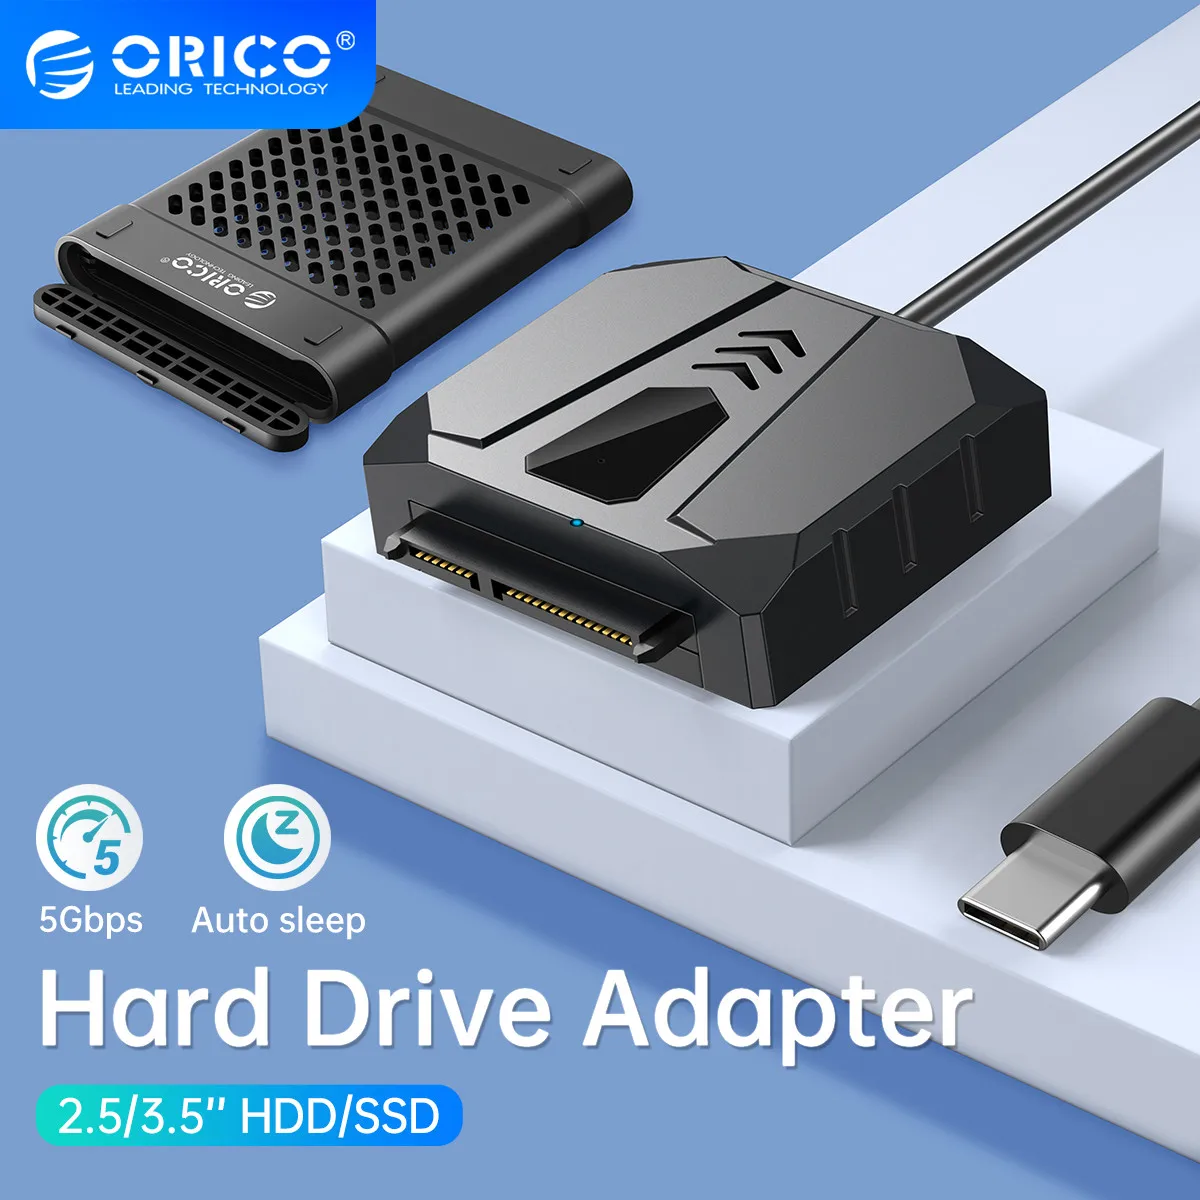 bag At blokere nøjagtigt ORICO HDD Drive Adapter USB 3.0 to SATA Cable SATA Converter SATA Adapte  For 2.5'' HDD/SSD External Hard Drive Disk